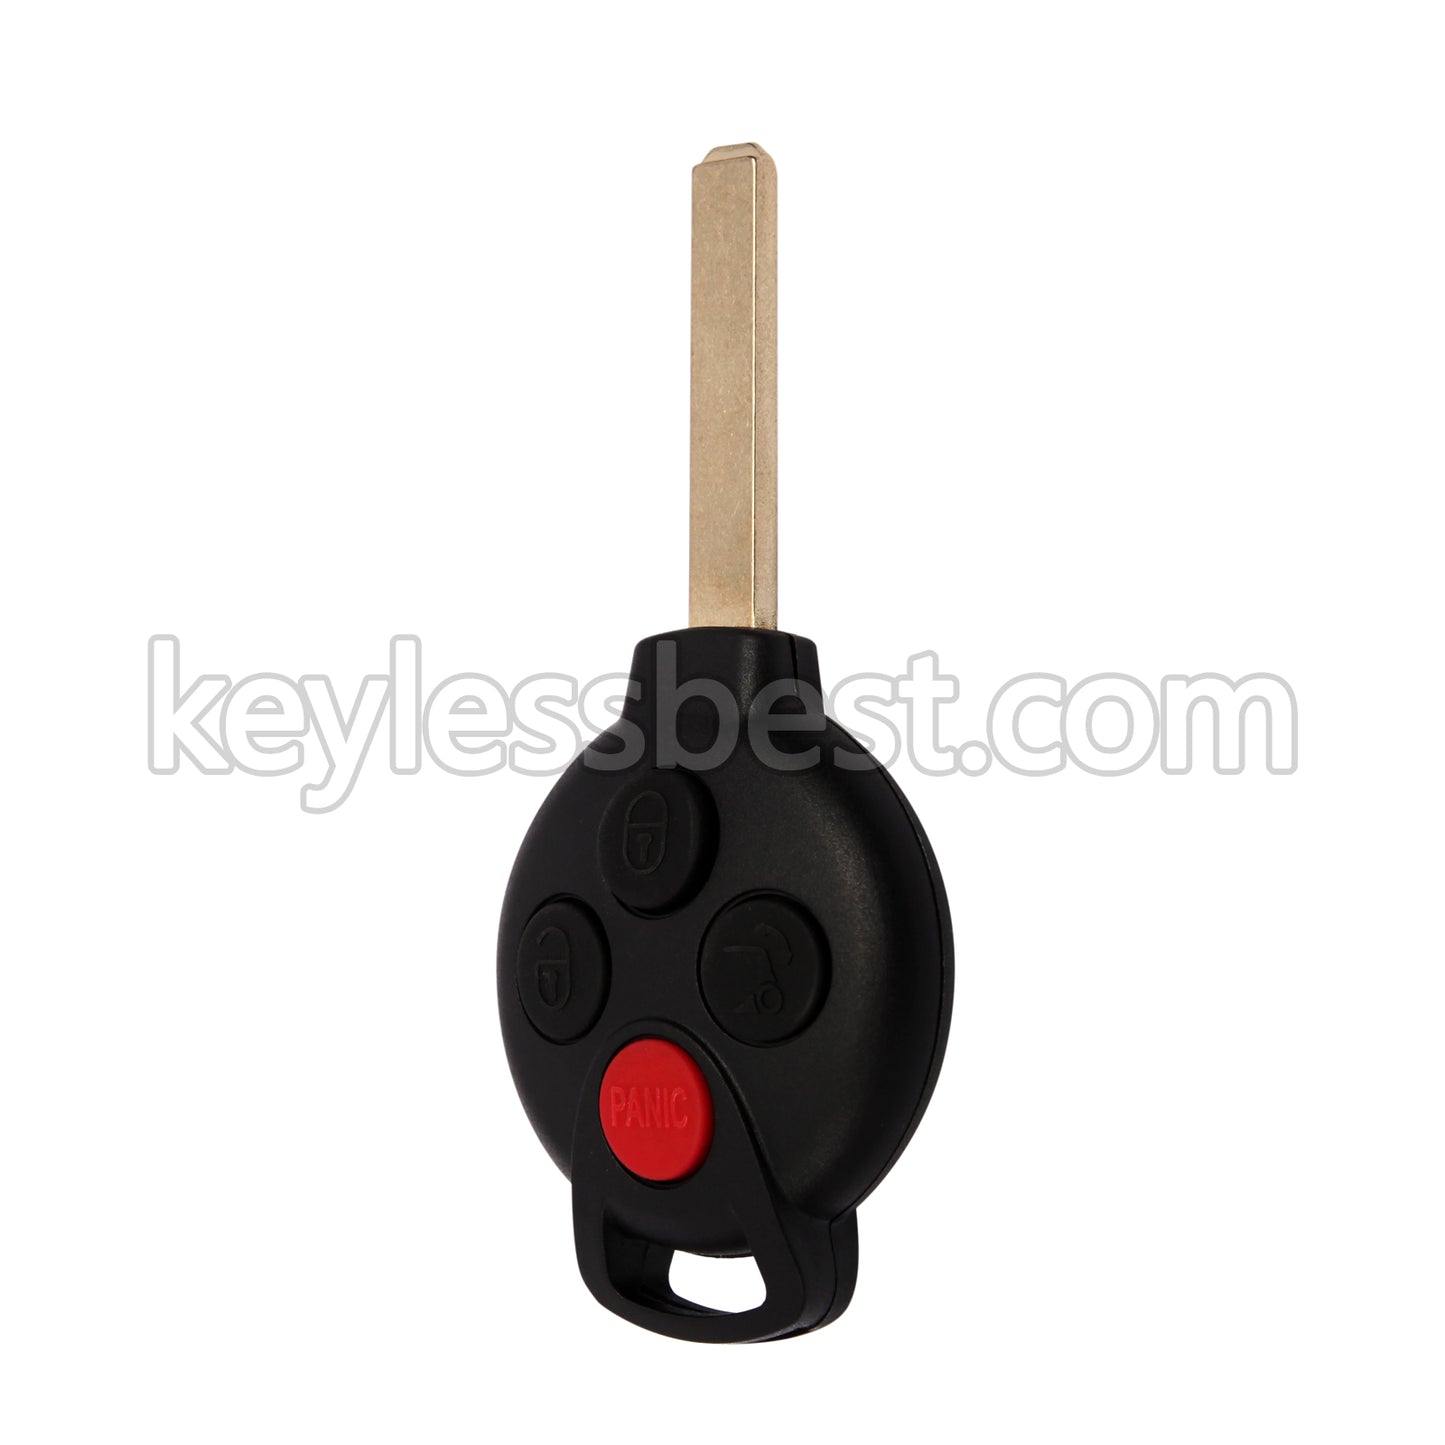 2008 - 2015 Mercedes-Benz Smart Fortwo / 4 Buttons Remote Key / KR55WK45144 / 315MHz